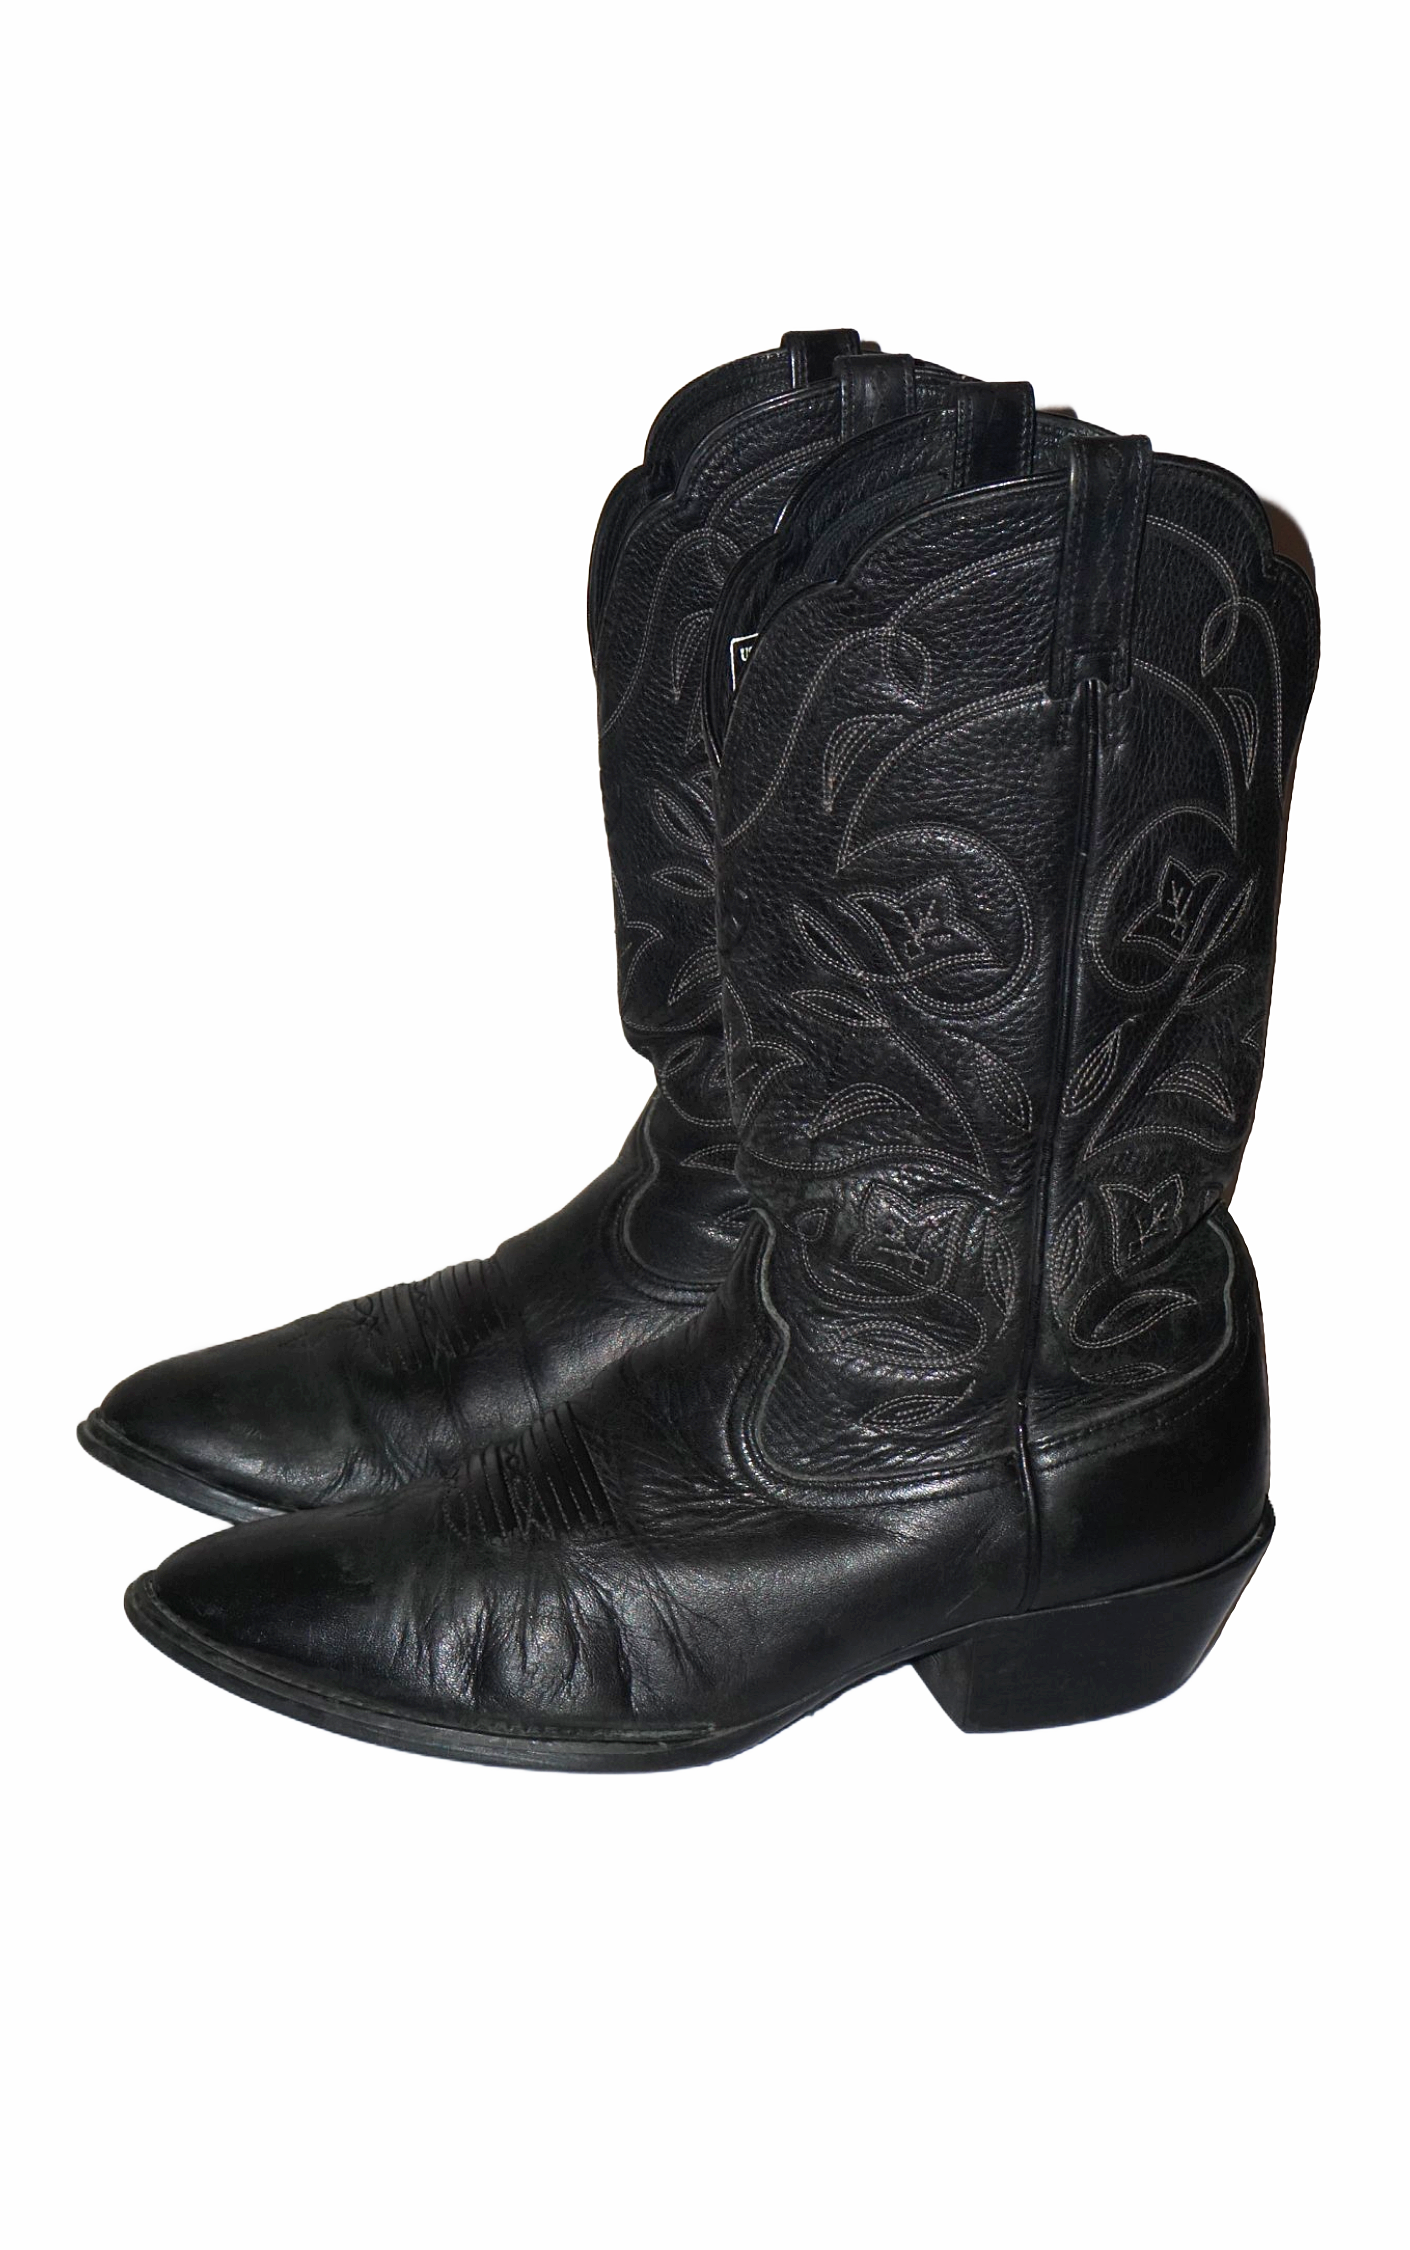 VINTAGE Black Leather Flower Pattern Western Cowboy Riding Boots resellum